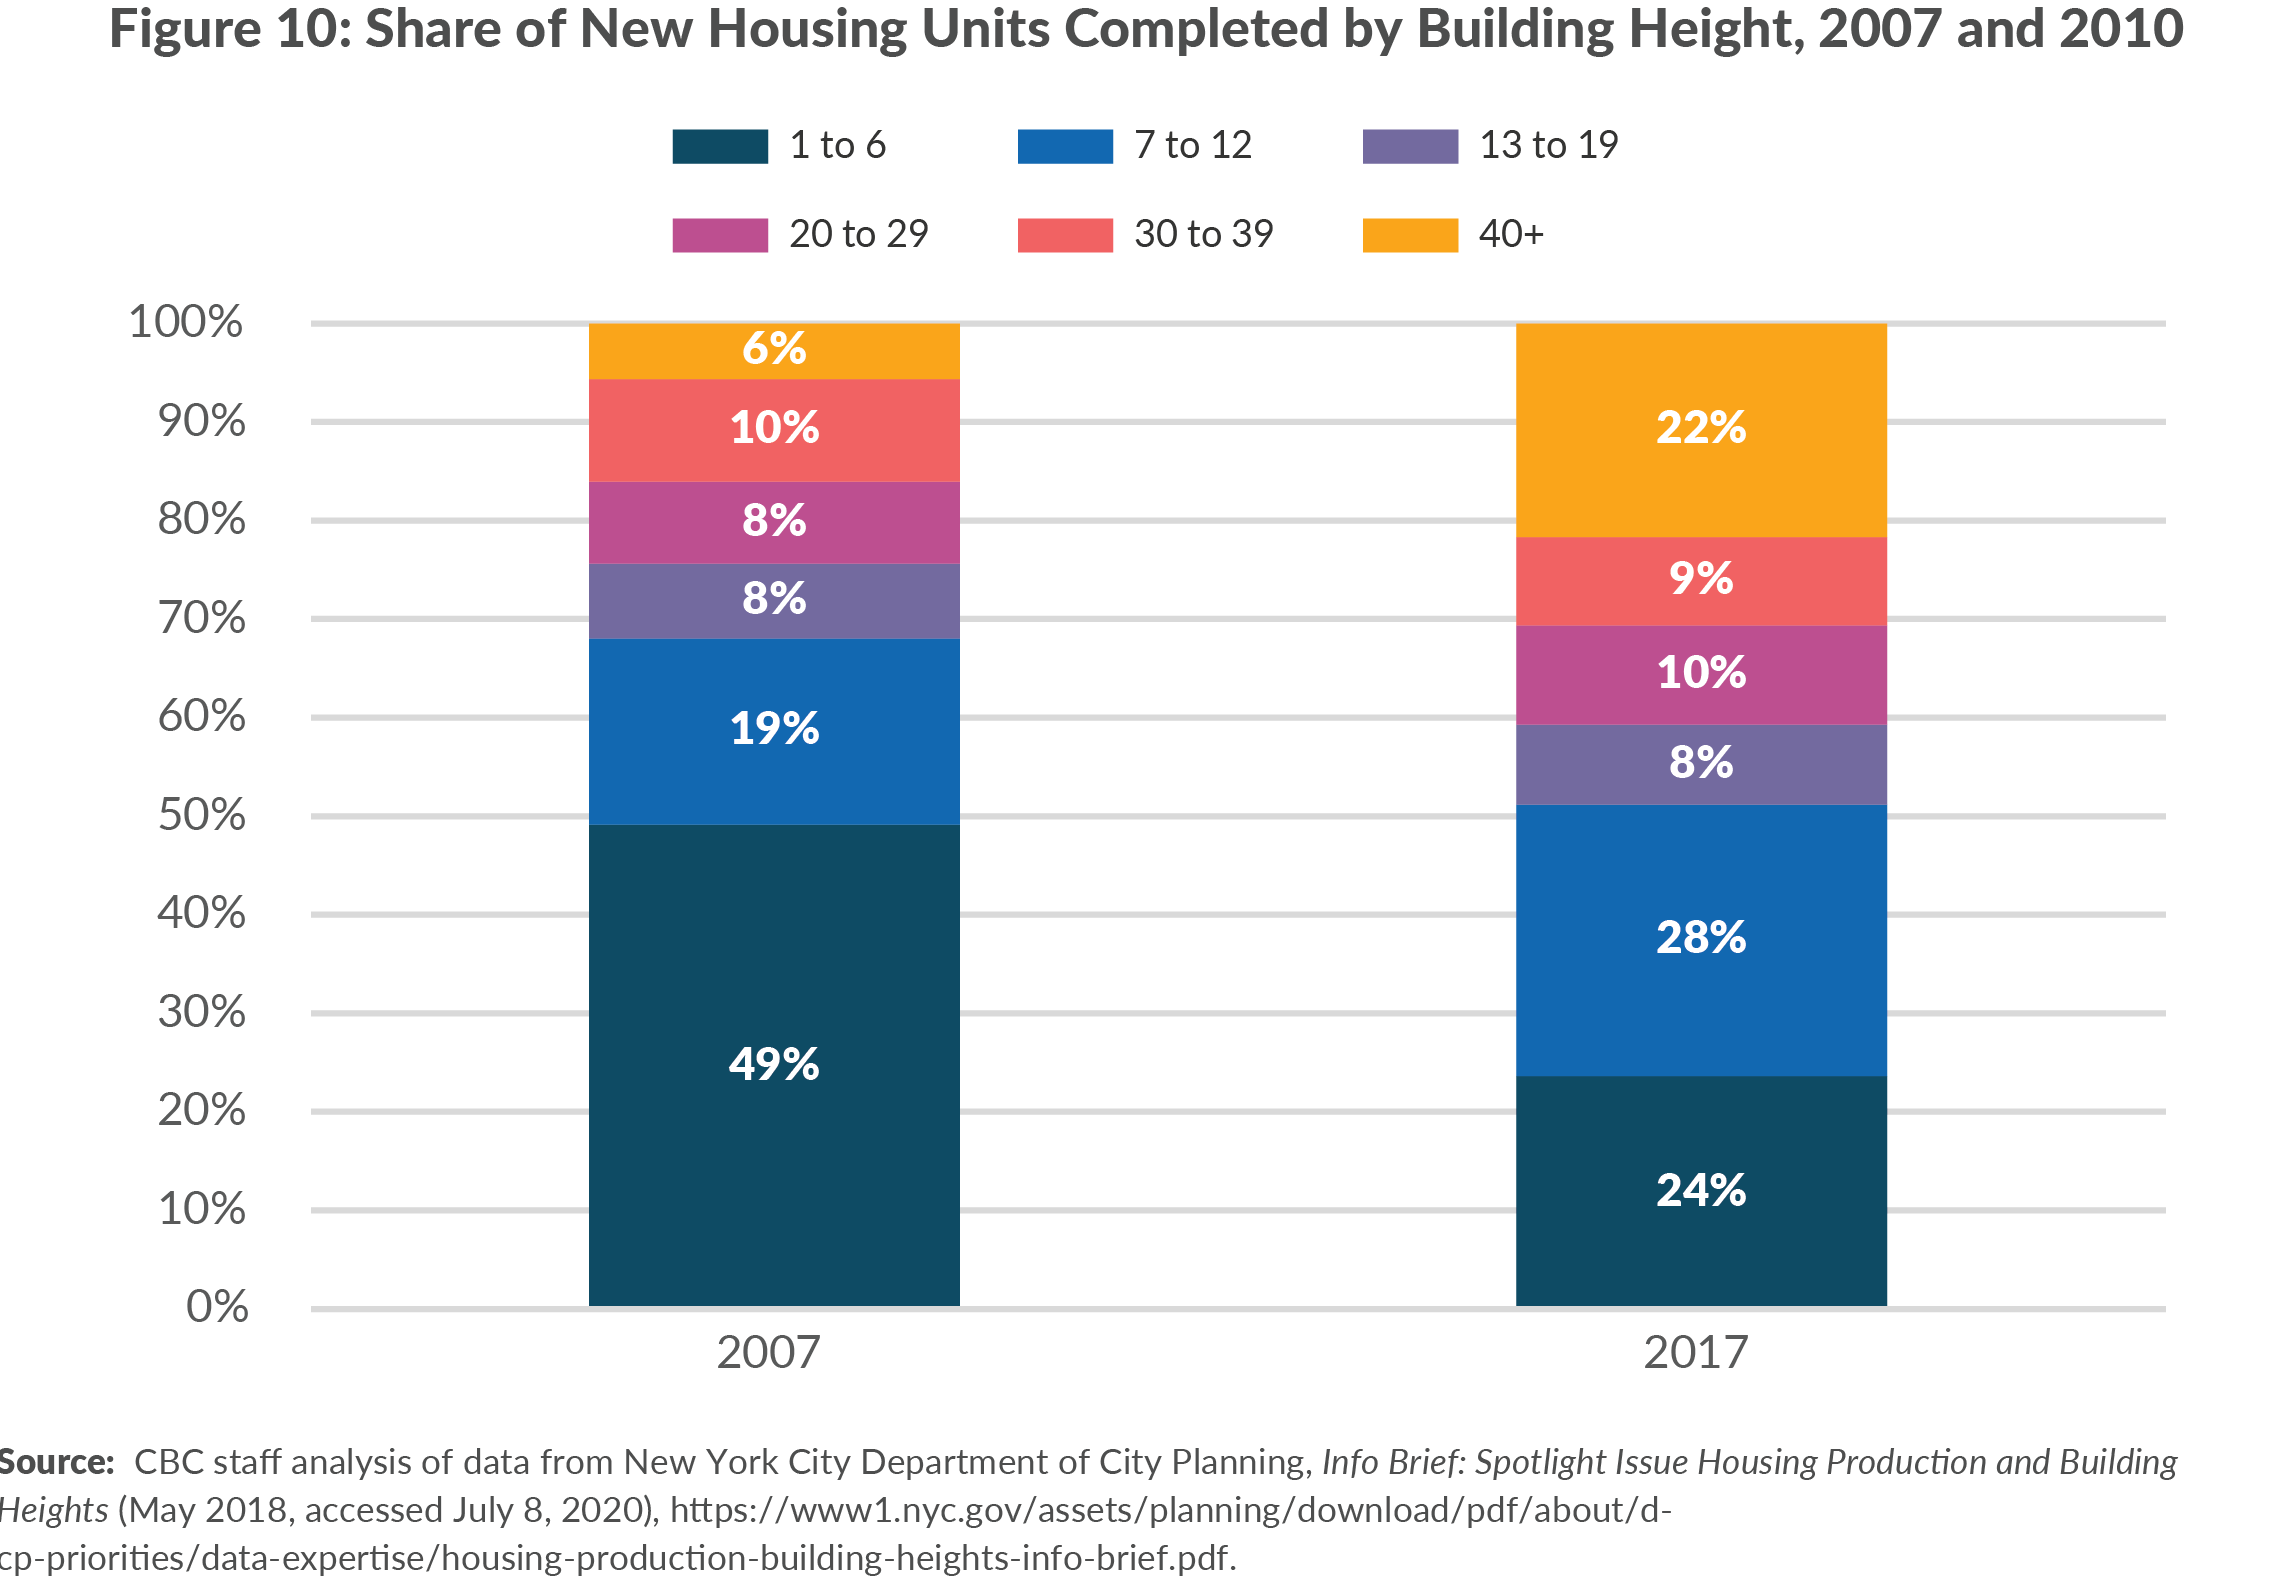 Figure 10. New Housing Units Completions by Building Height, 2000-2017